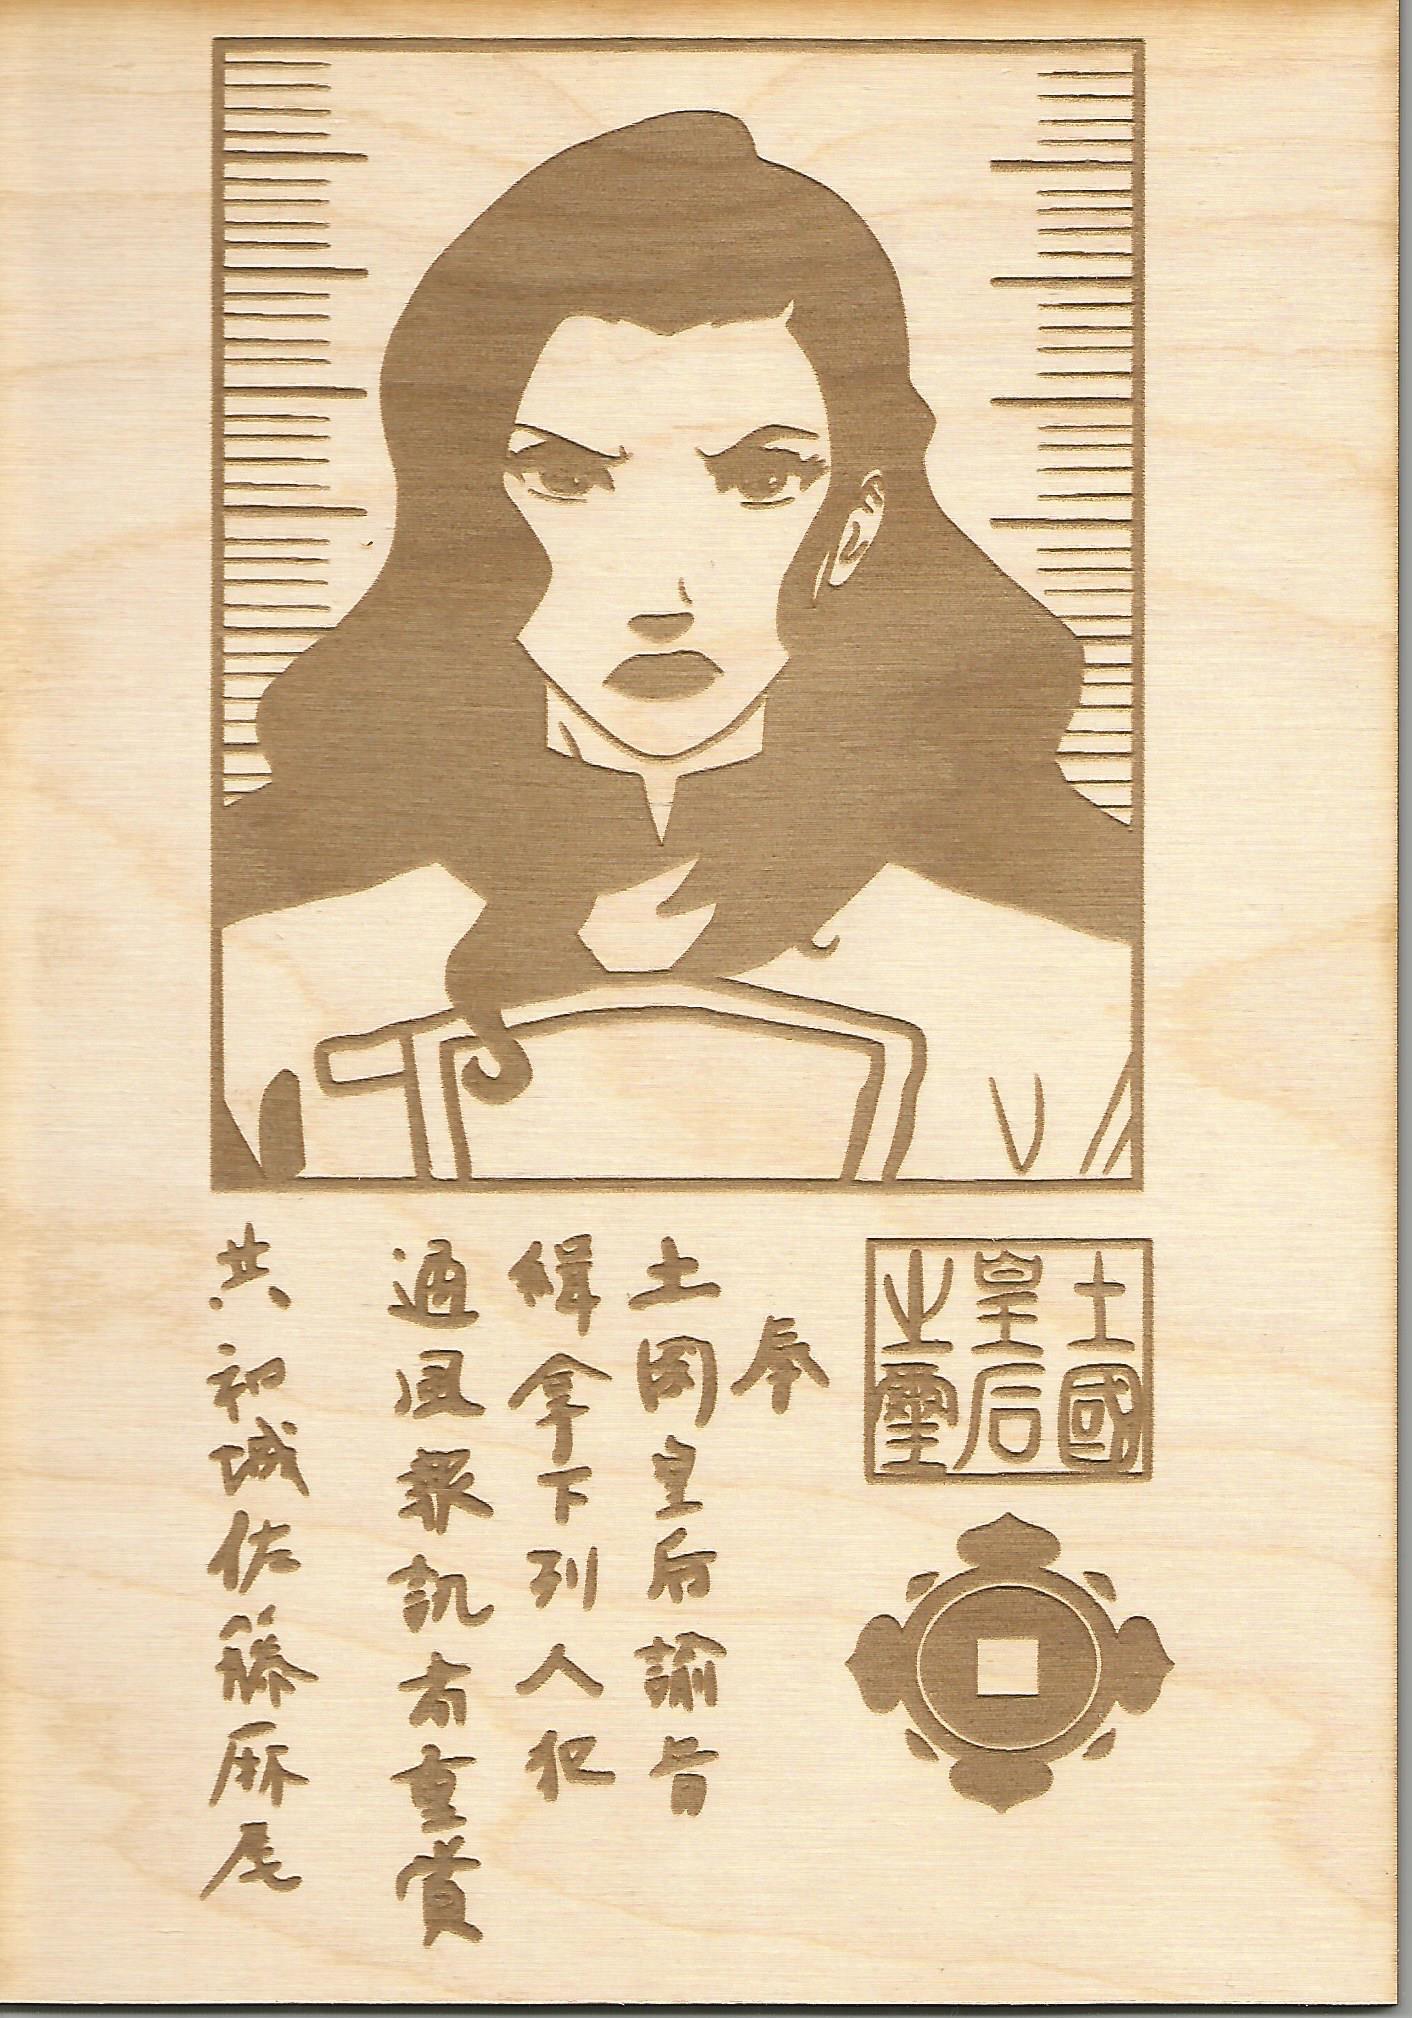 The Legend of Korra- Asami Wooden Wanted Poster - TantrumCollectibles.com